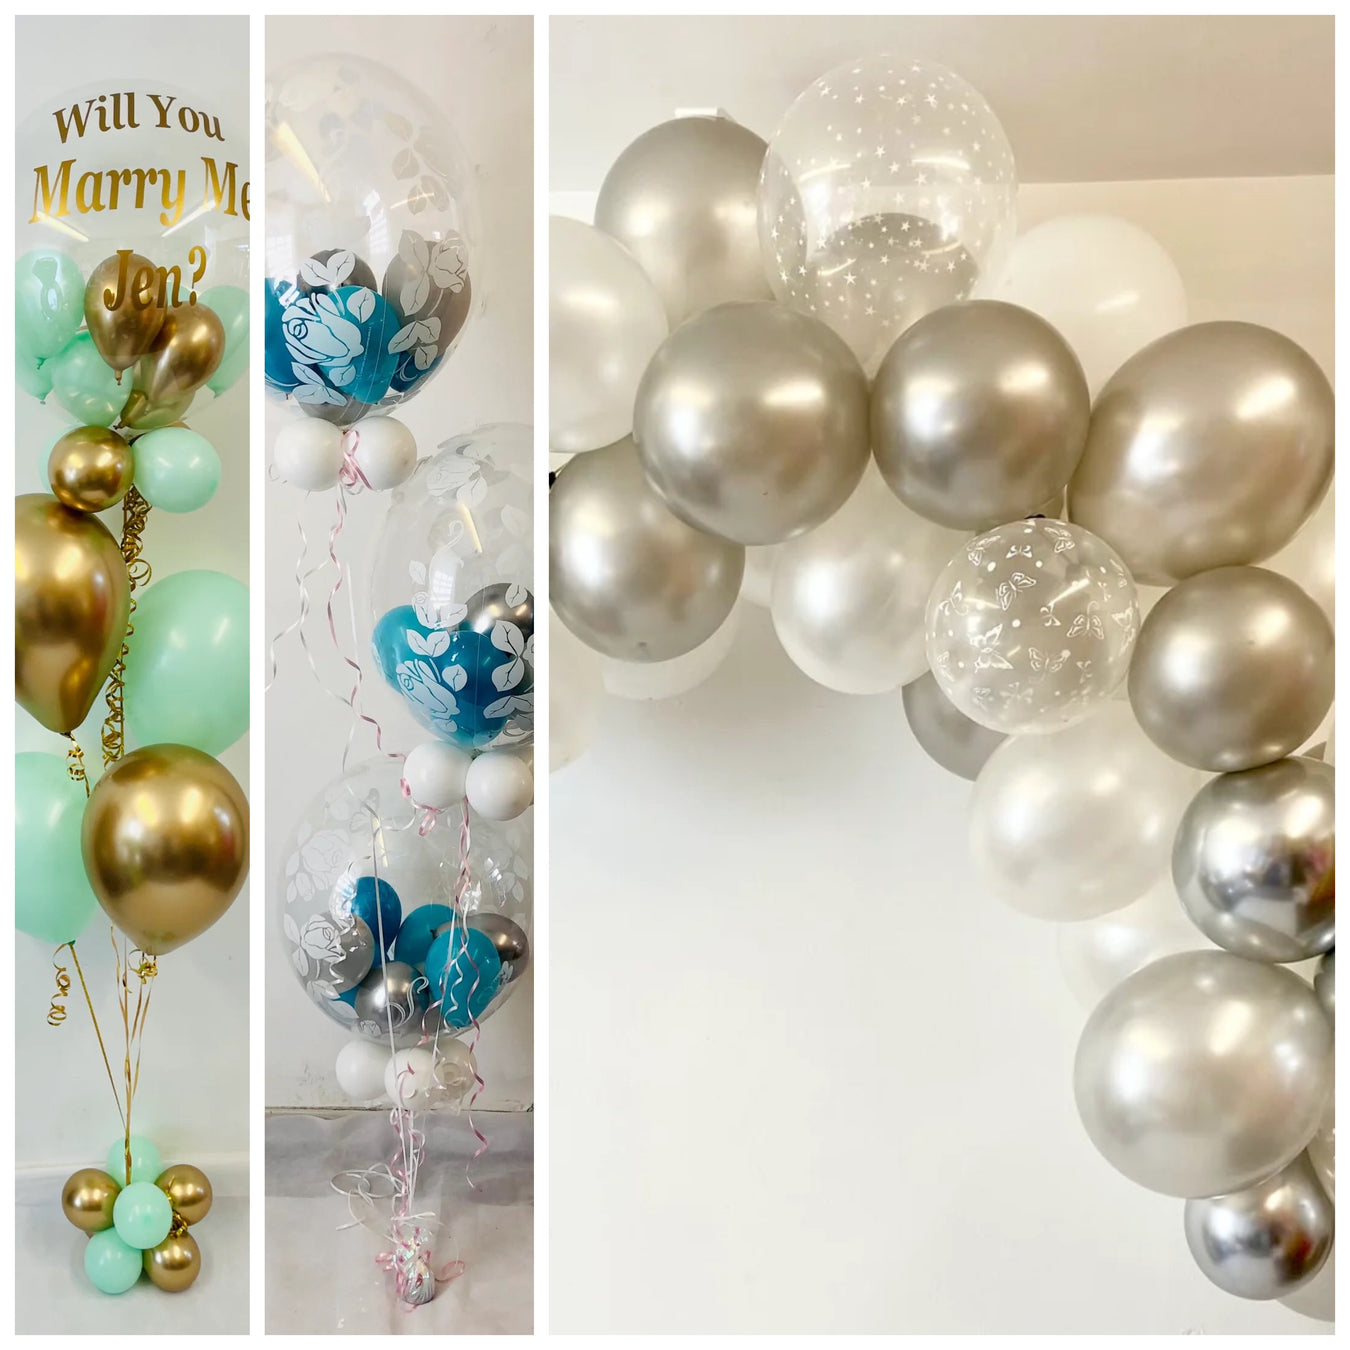 Engagement (Special Occasion Balloon Displays)